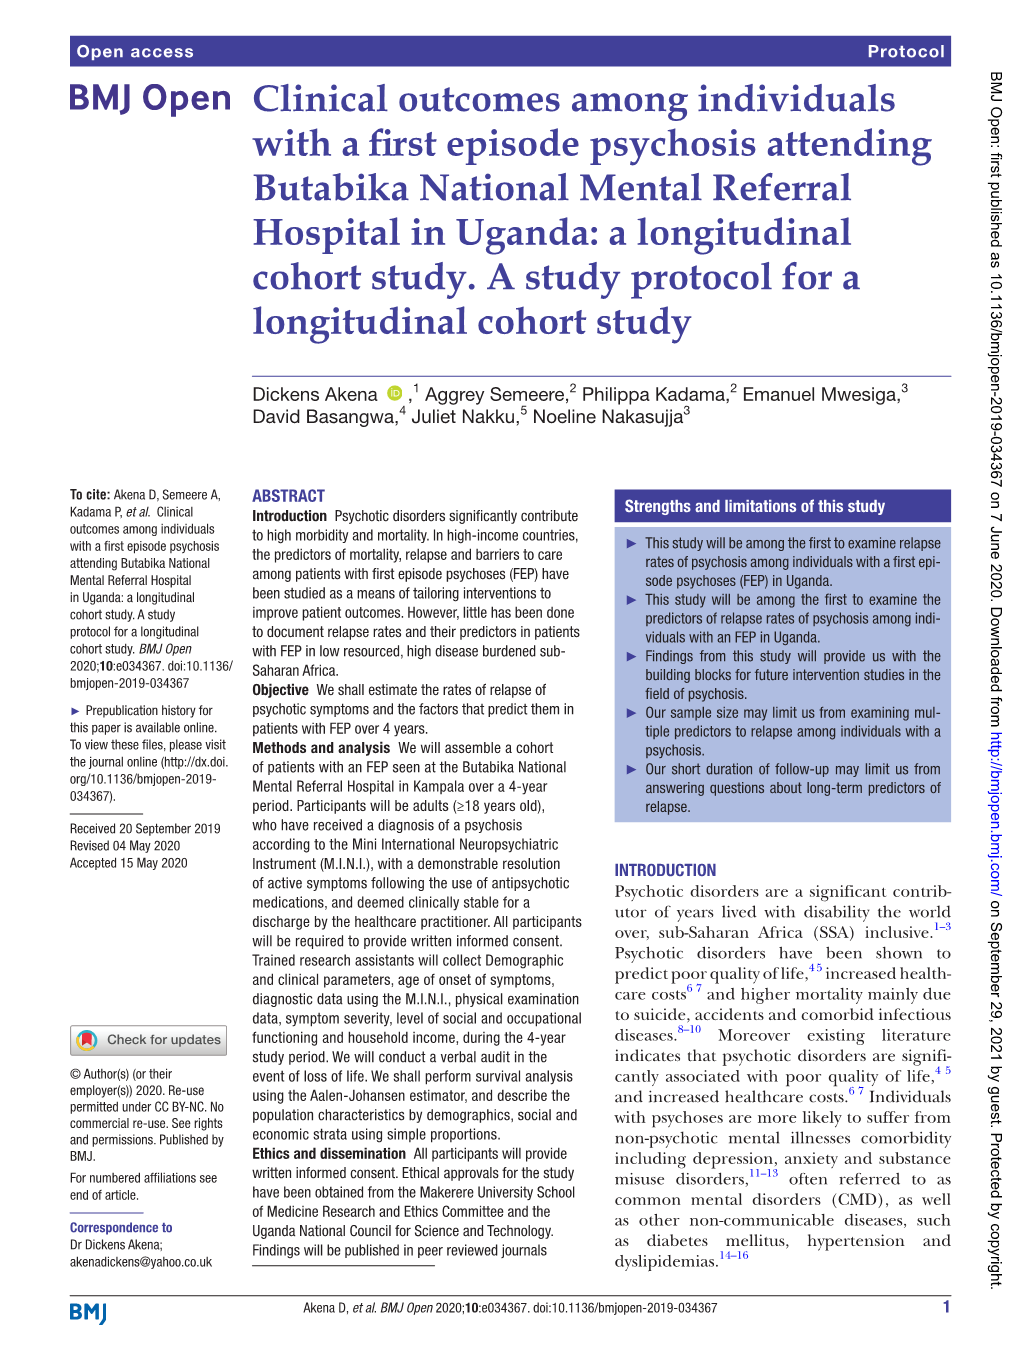 Clinical Outcomes Among Individuals with a First Episode Psychosis Attending Butabika National Mental Referral Hospital in Uganda: a Longitudinal Cohort Study